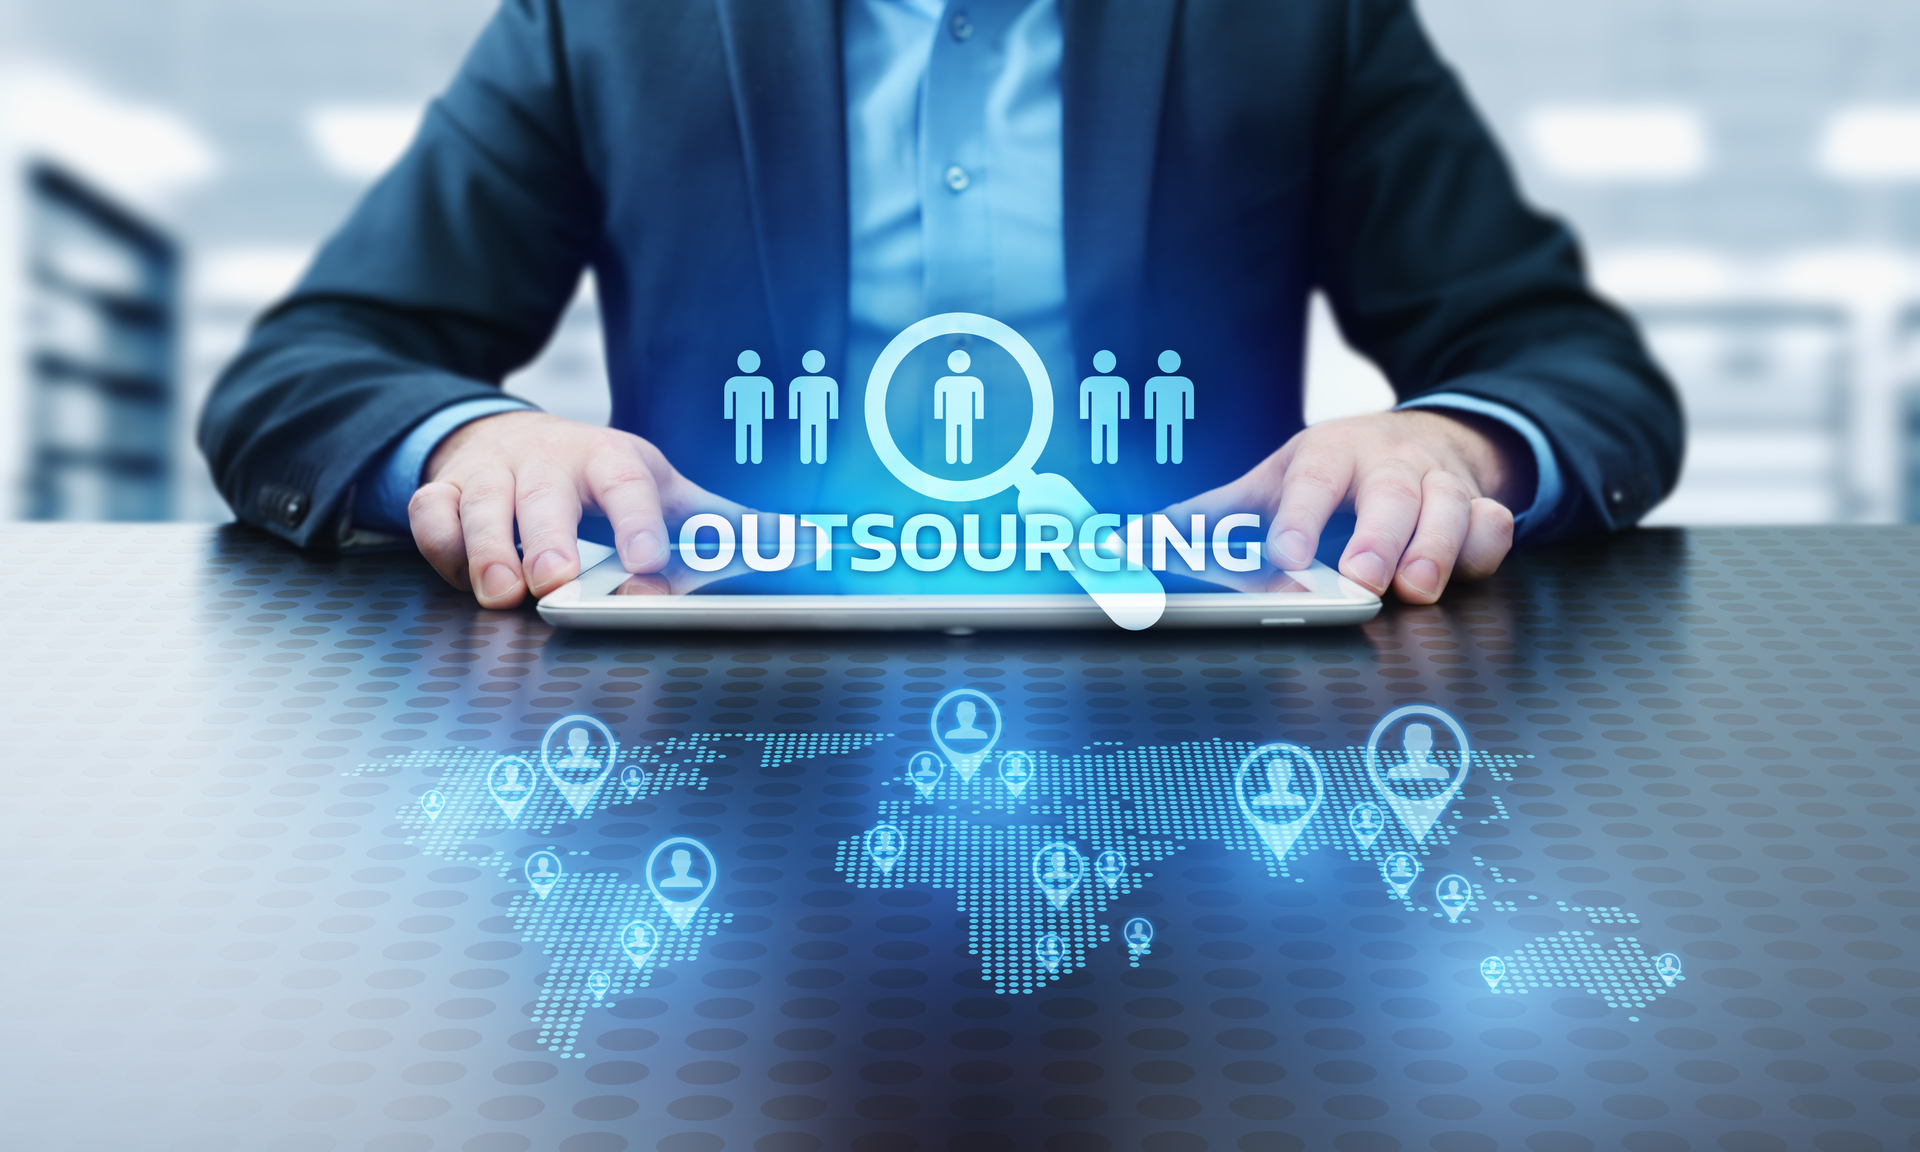 IT Outsource